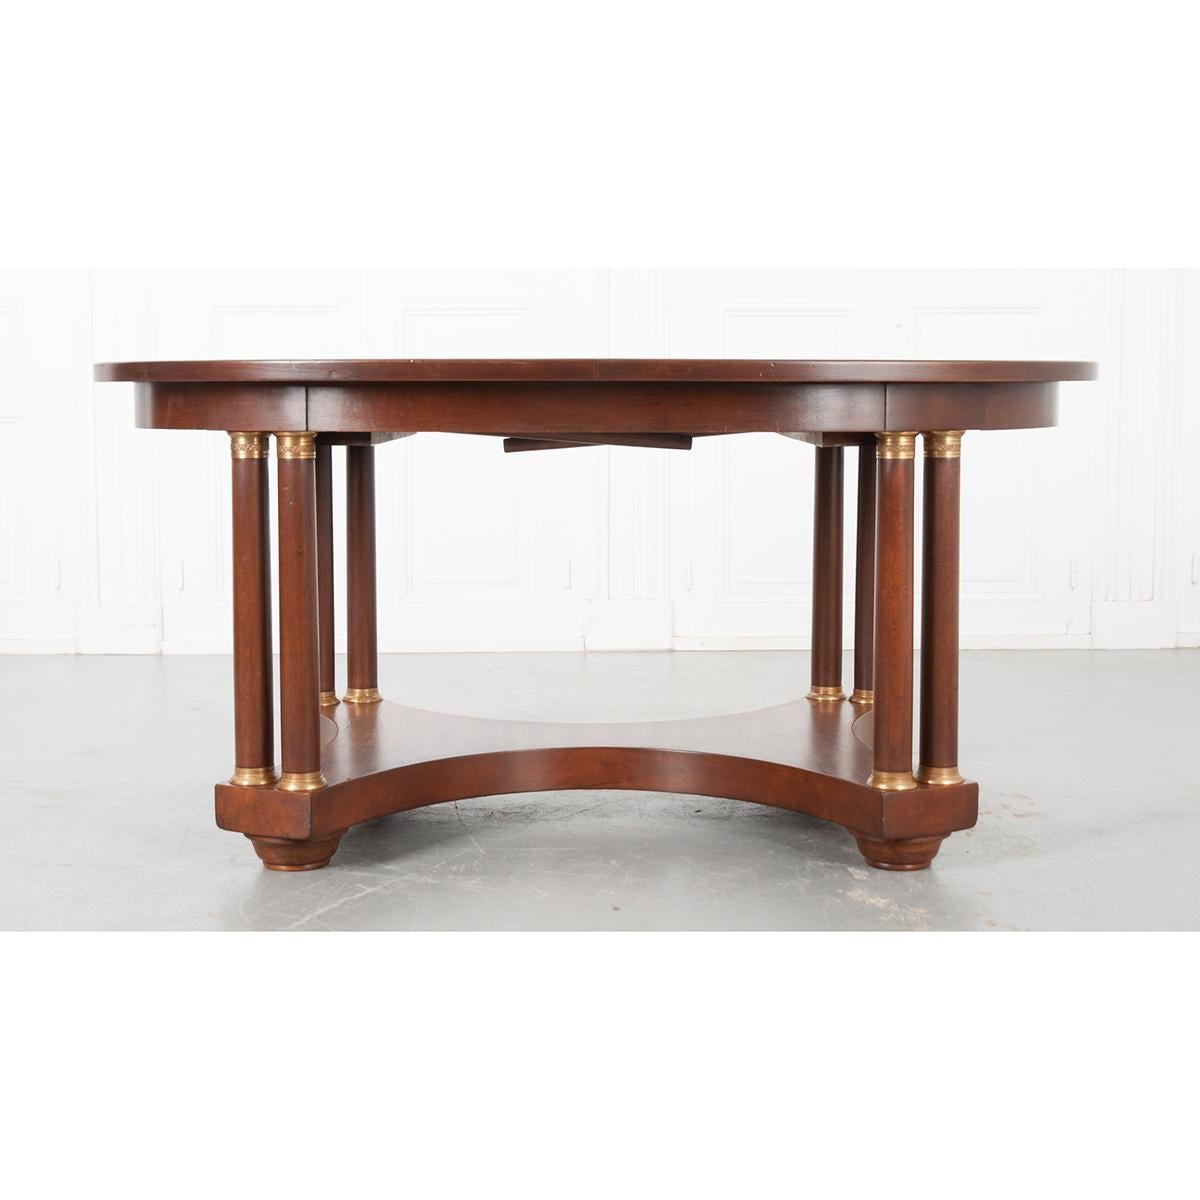 This Empire style table would be perfect as a dinning or central table. It has the ability to extend to 110” long with 4 foldable legs attached for stability. Leaves not included with the table. This stunning table is supported by 8 column legs